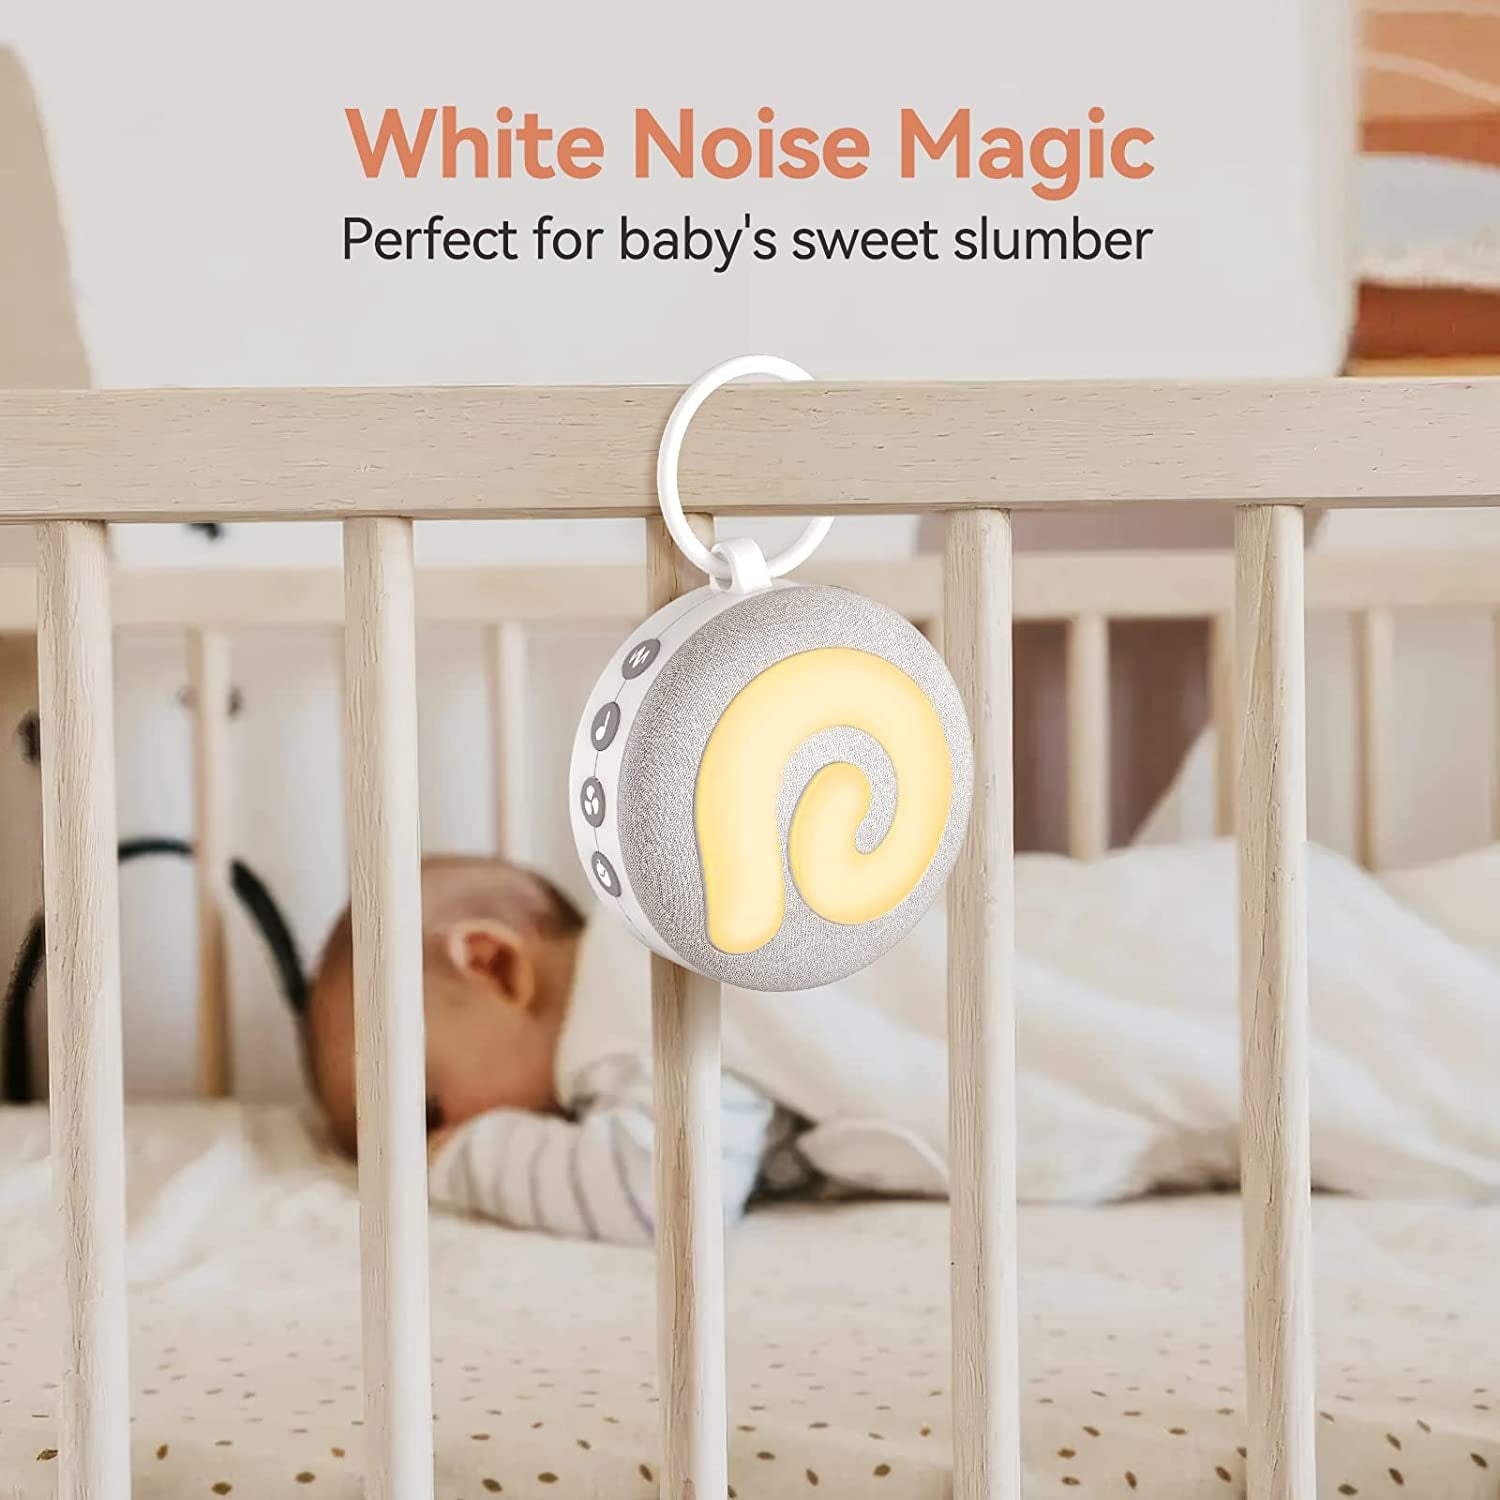 Dreamegg Portable Sound Machine Baby - D11 White Noise Machine for Baby  Sleeping with Night Light, White Noise, Lullaby, Nature Sounds, Child Lock